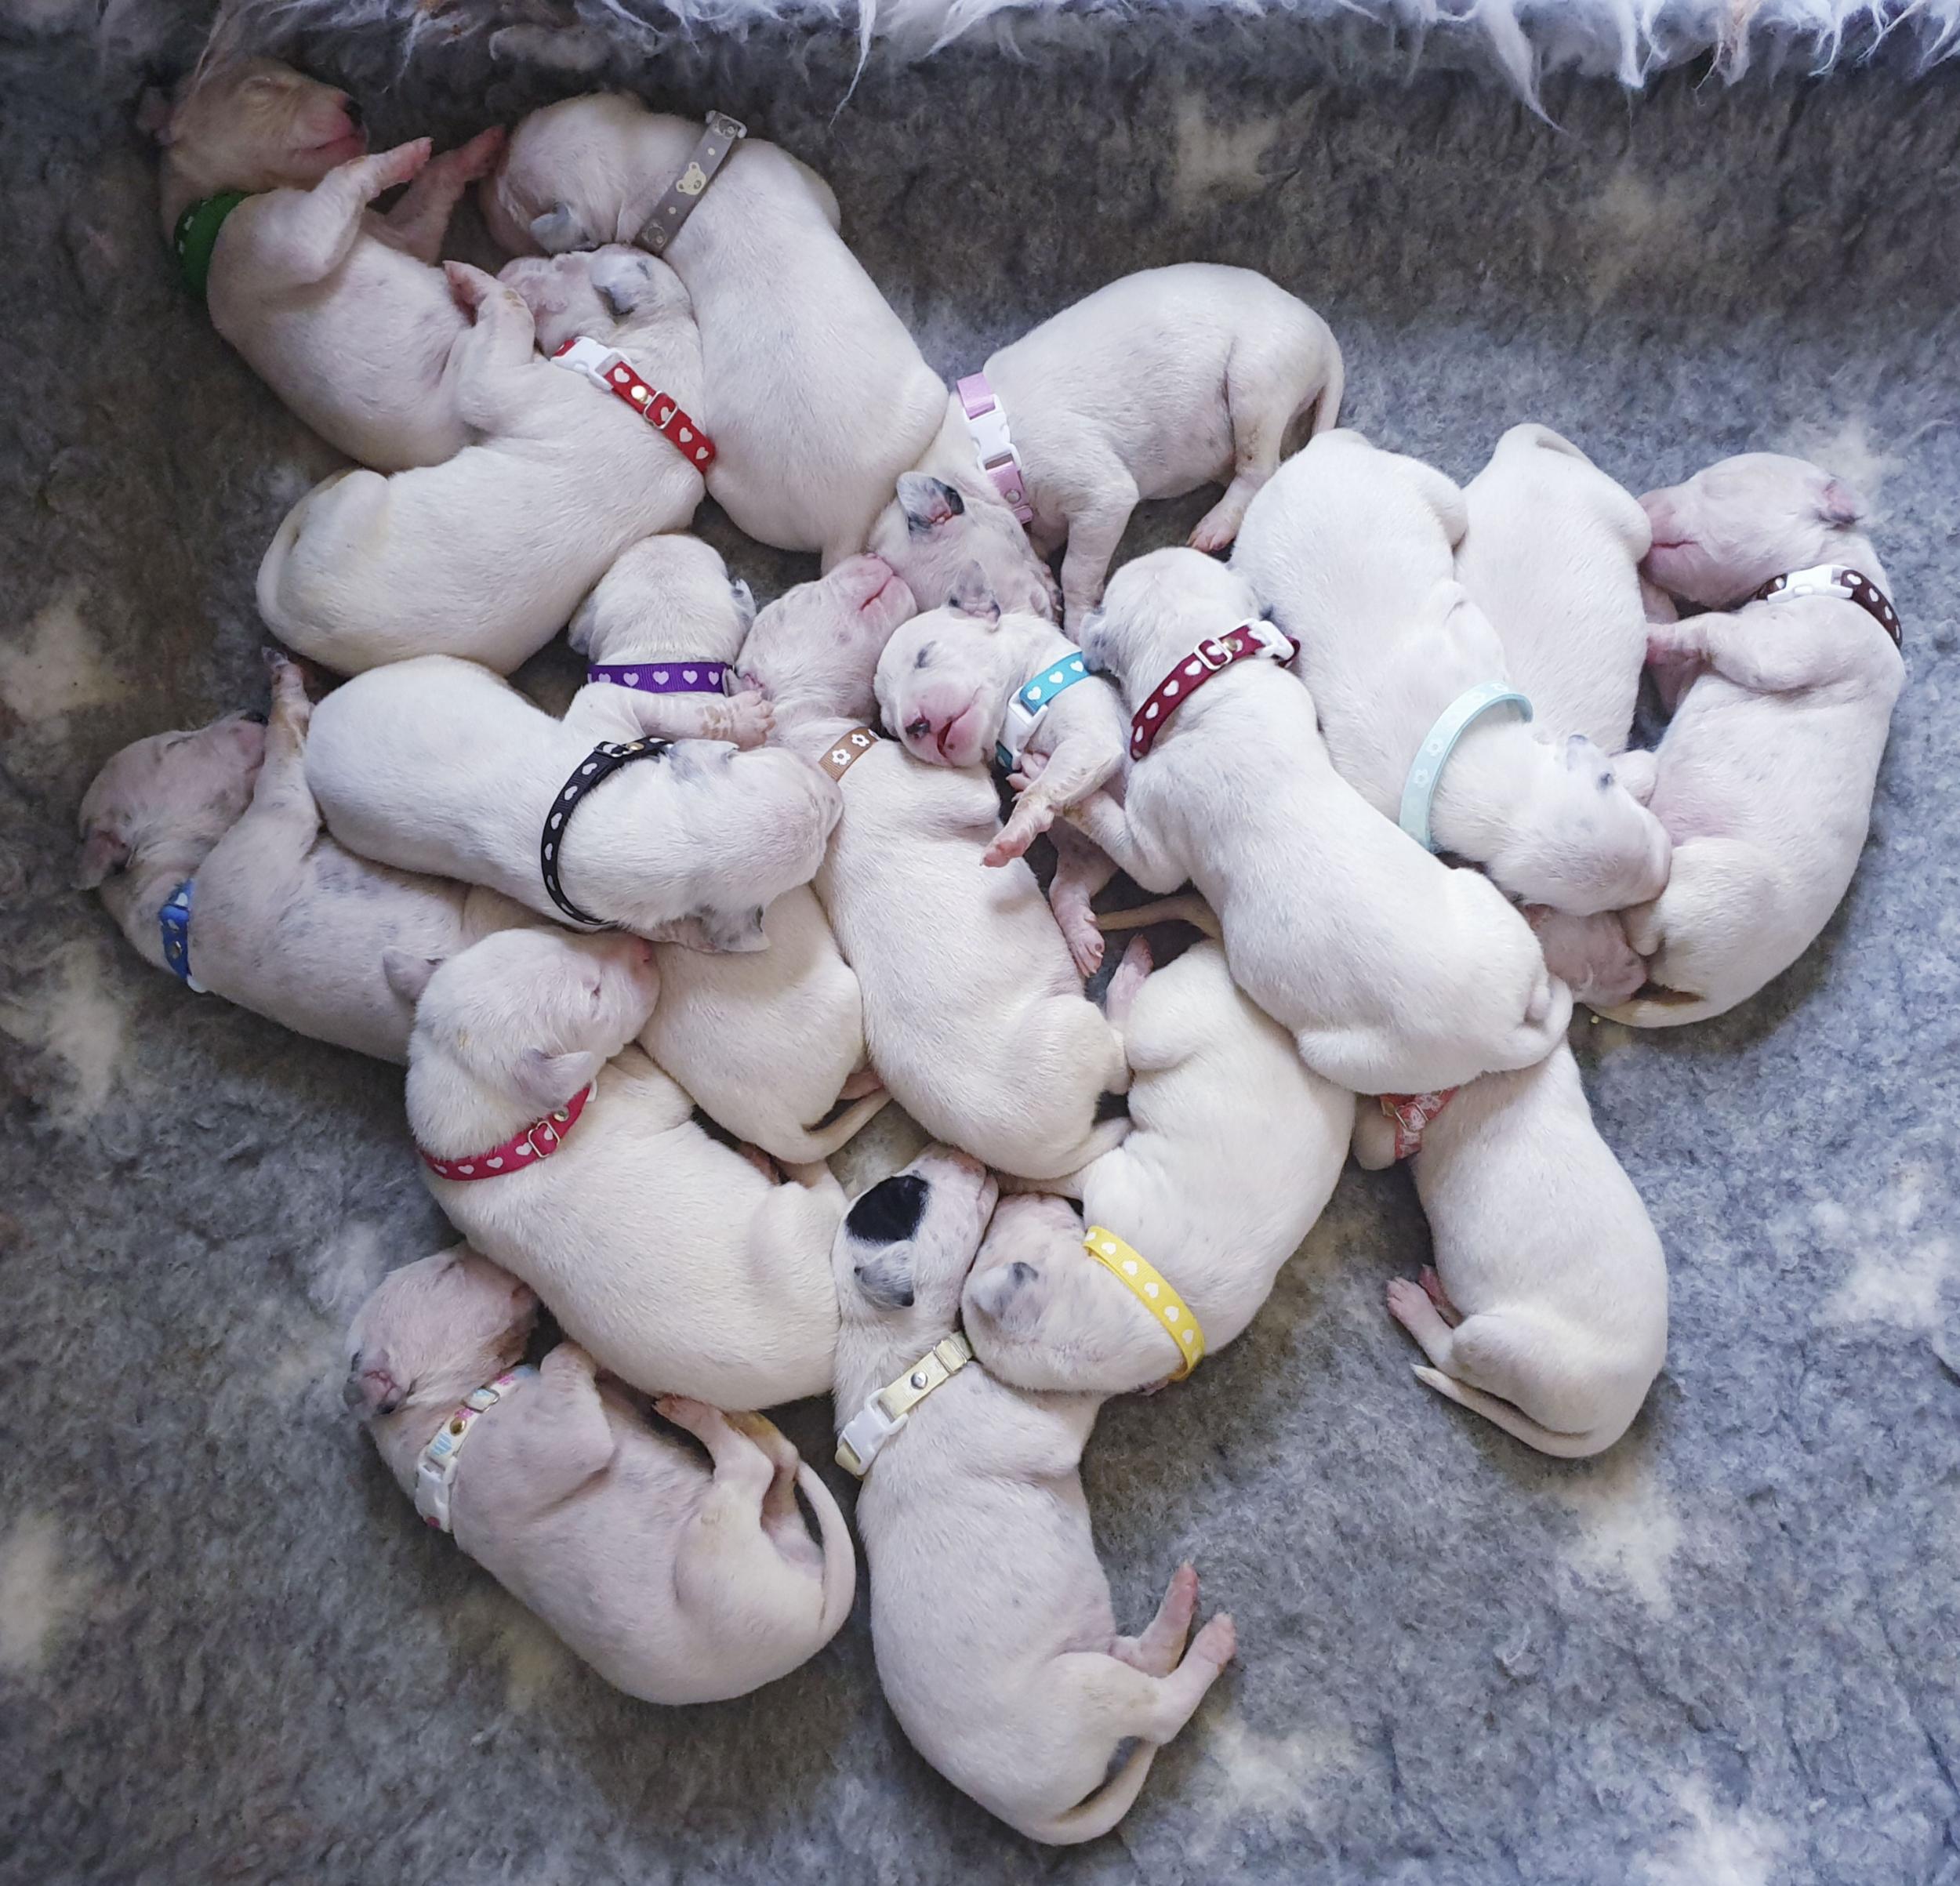 Dalmatian gives birth to 20 puppies following 20 hour…